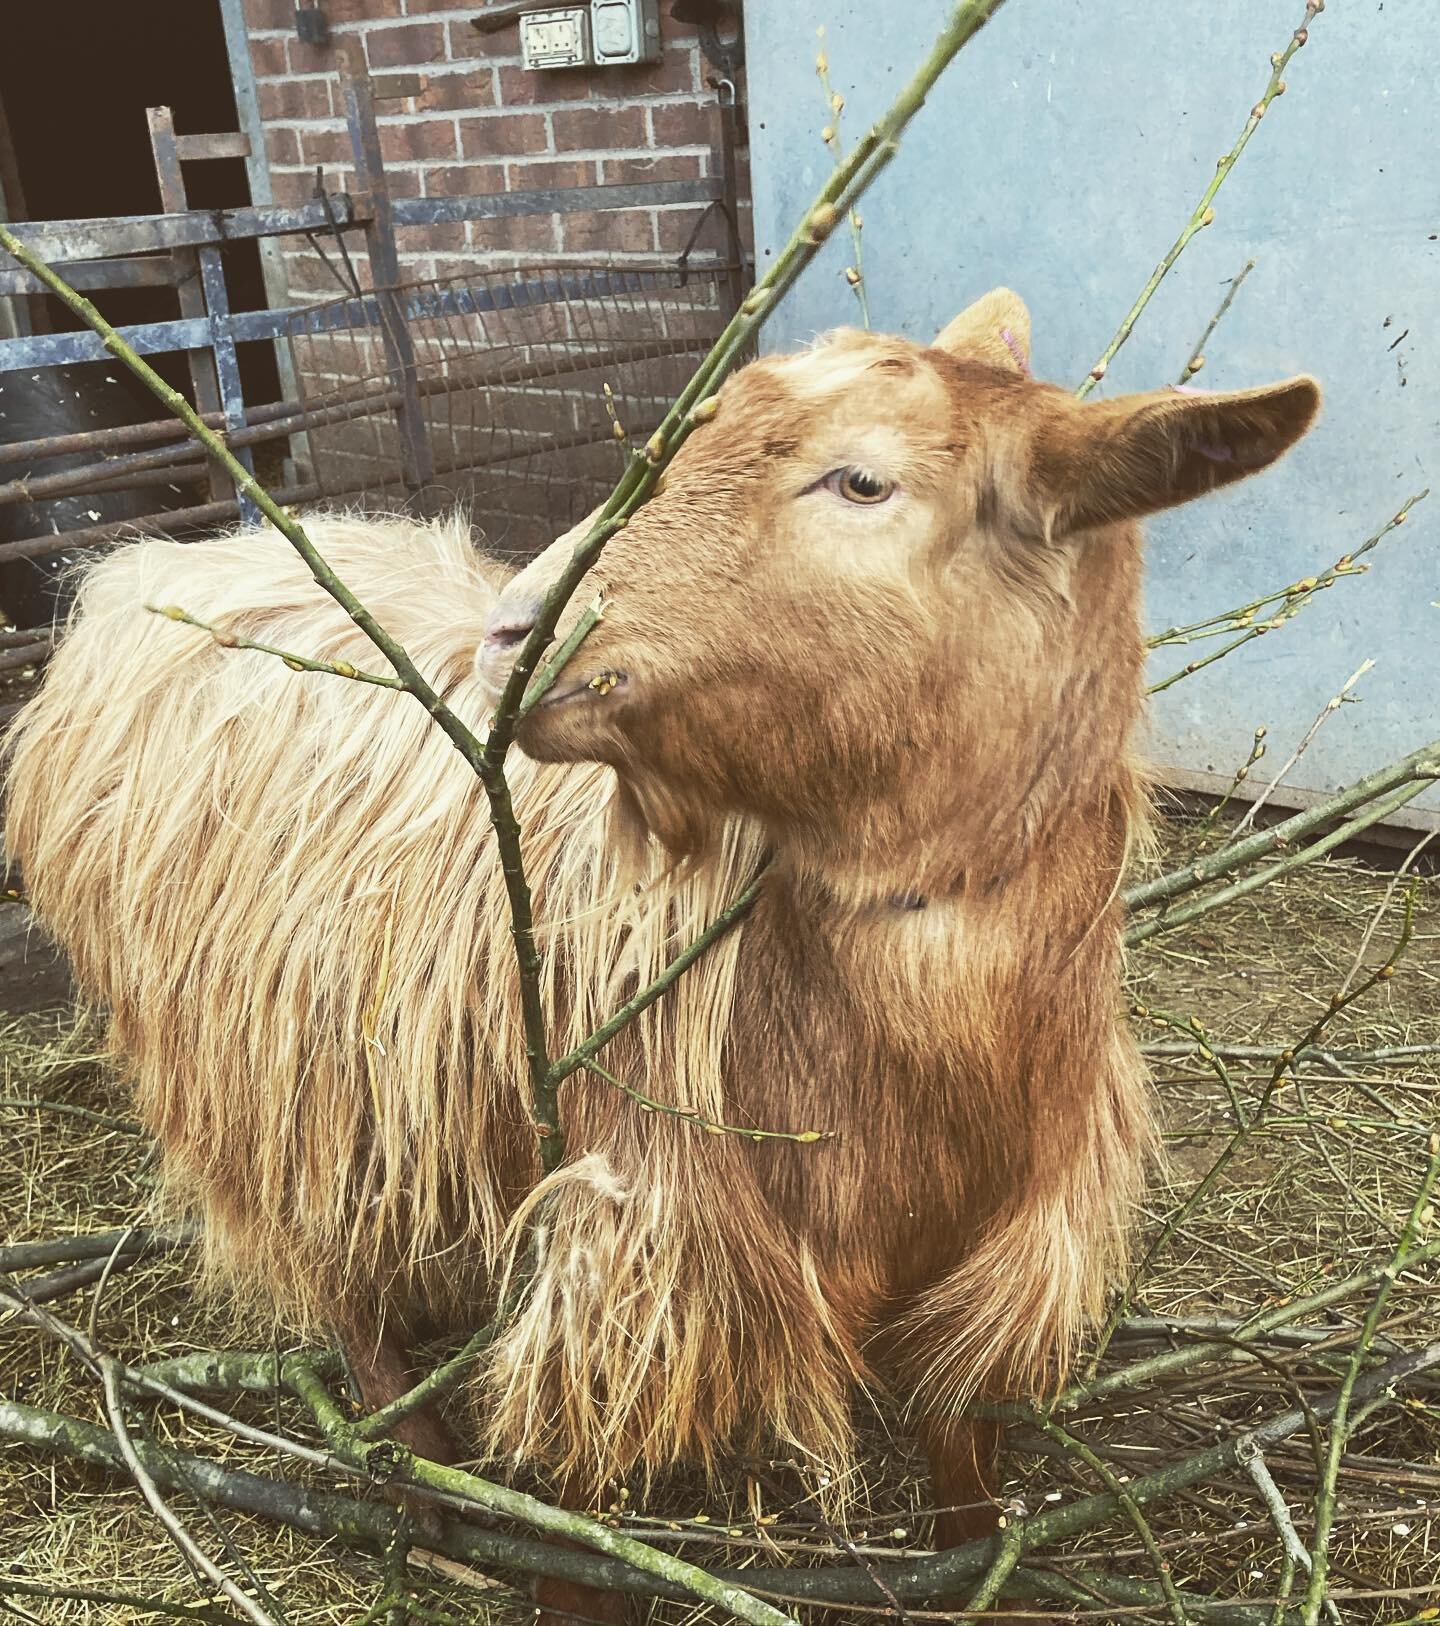 A photo of our less often seen farm residents. The beautiful Golden Guernsey goats! Myrtle (photo&rsquo;d) and Edith are enjoying some tree/hedge cuttings today! #goat #goats #gurnsey #gurnseygoats #gurnseygoat #goldenguernseygoats #goldengurnseygoat